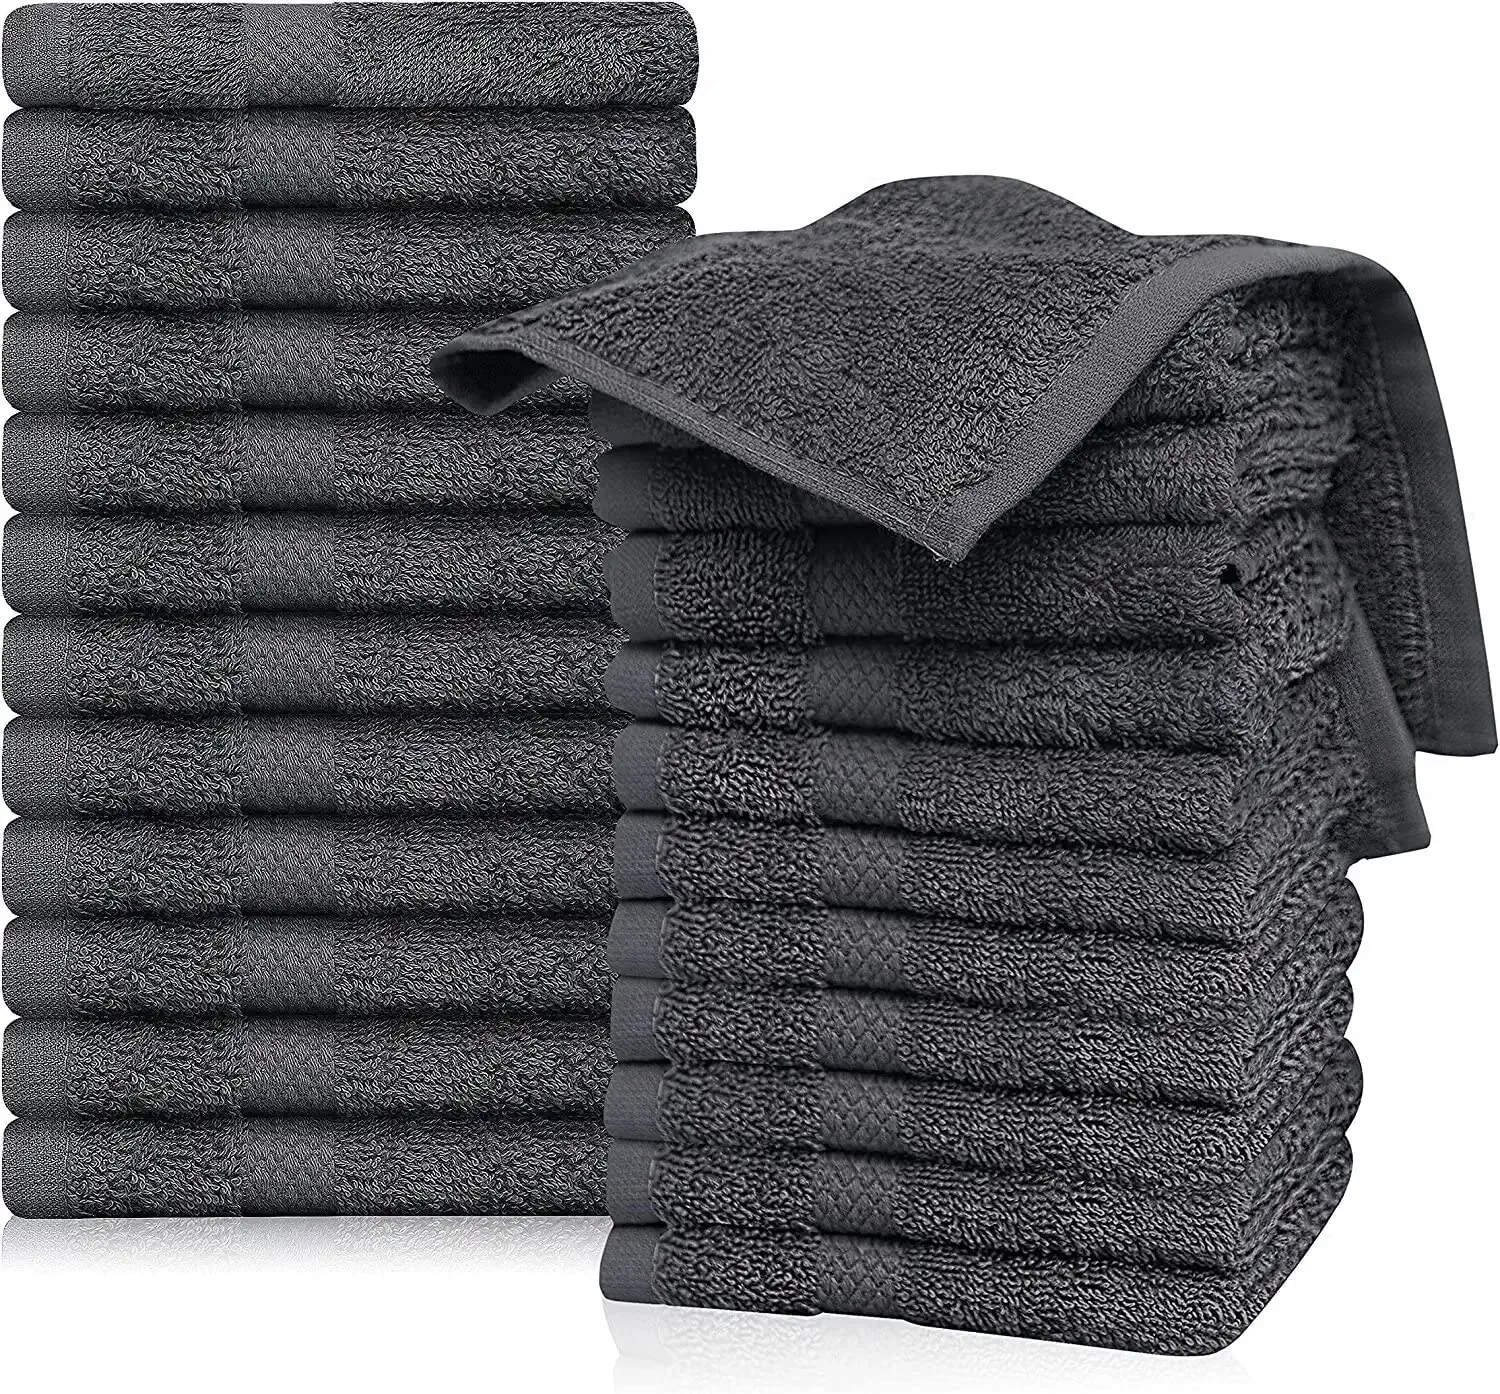 

Wealuxe Cotton Washcloths - Soft Absorbent Bathroom Face Towels - 12x12 Inch - White - 48 Pack